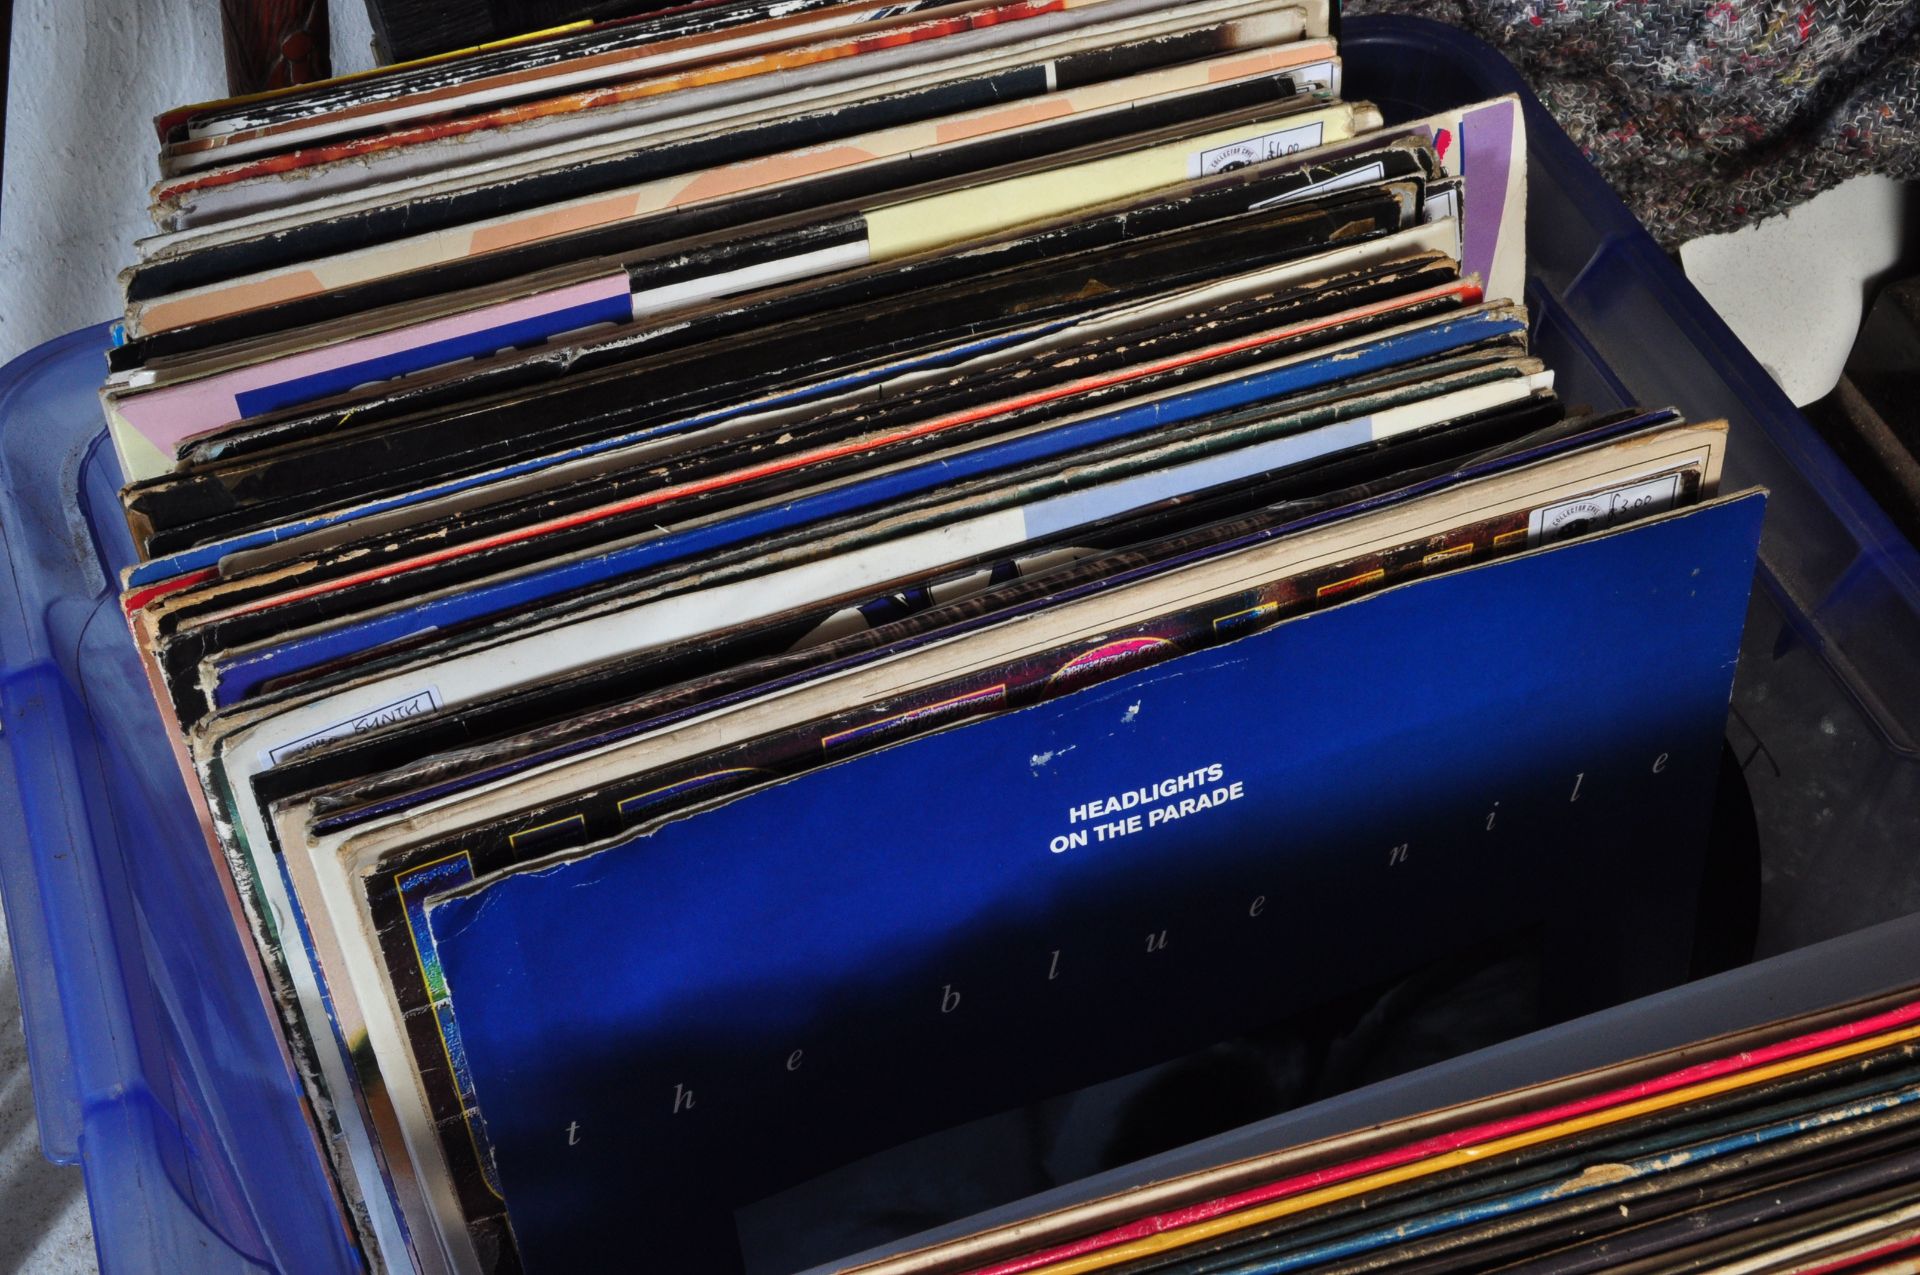 LARGE COLLECTION OF VINTAGE LONG PLAY VINYL RECORDS - Image 6 of 6